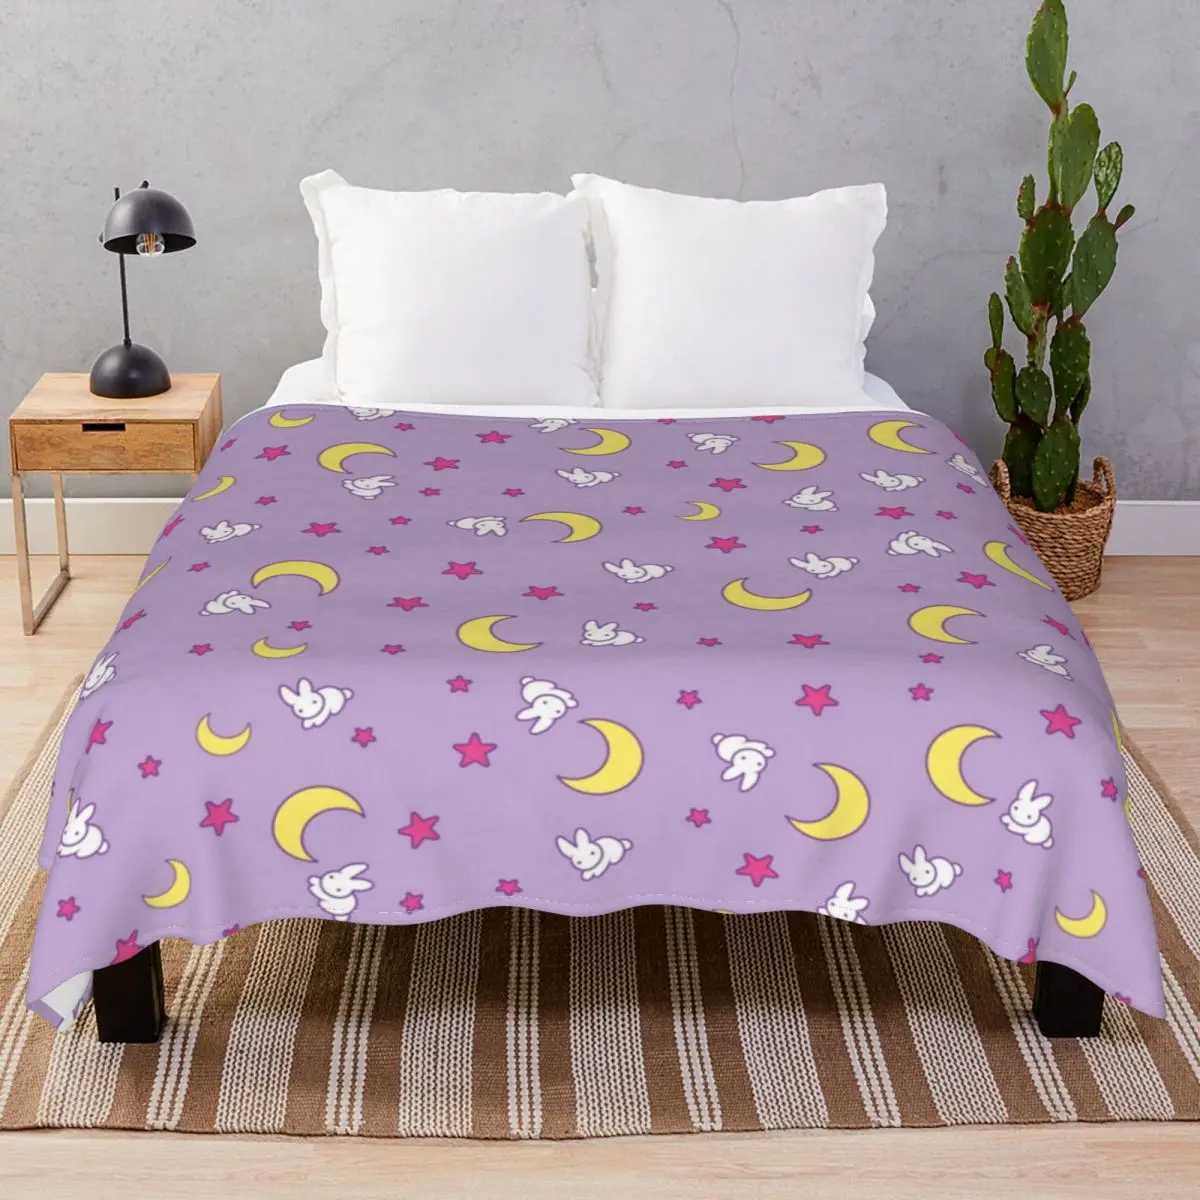 Moon And Bunny Blankets Fleece Winter Multifunction Throw Blanket for Bed Home Couch Camp Cinema